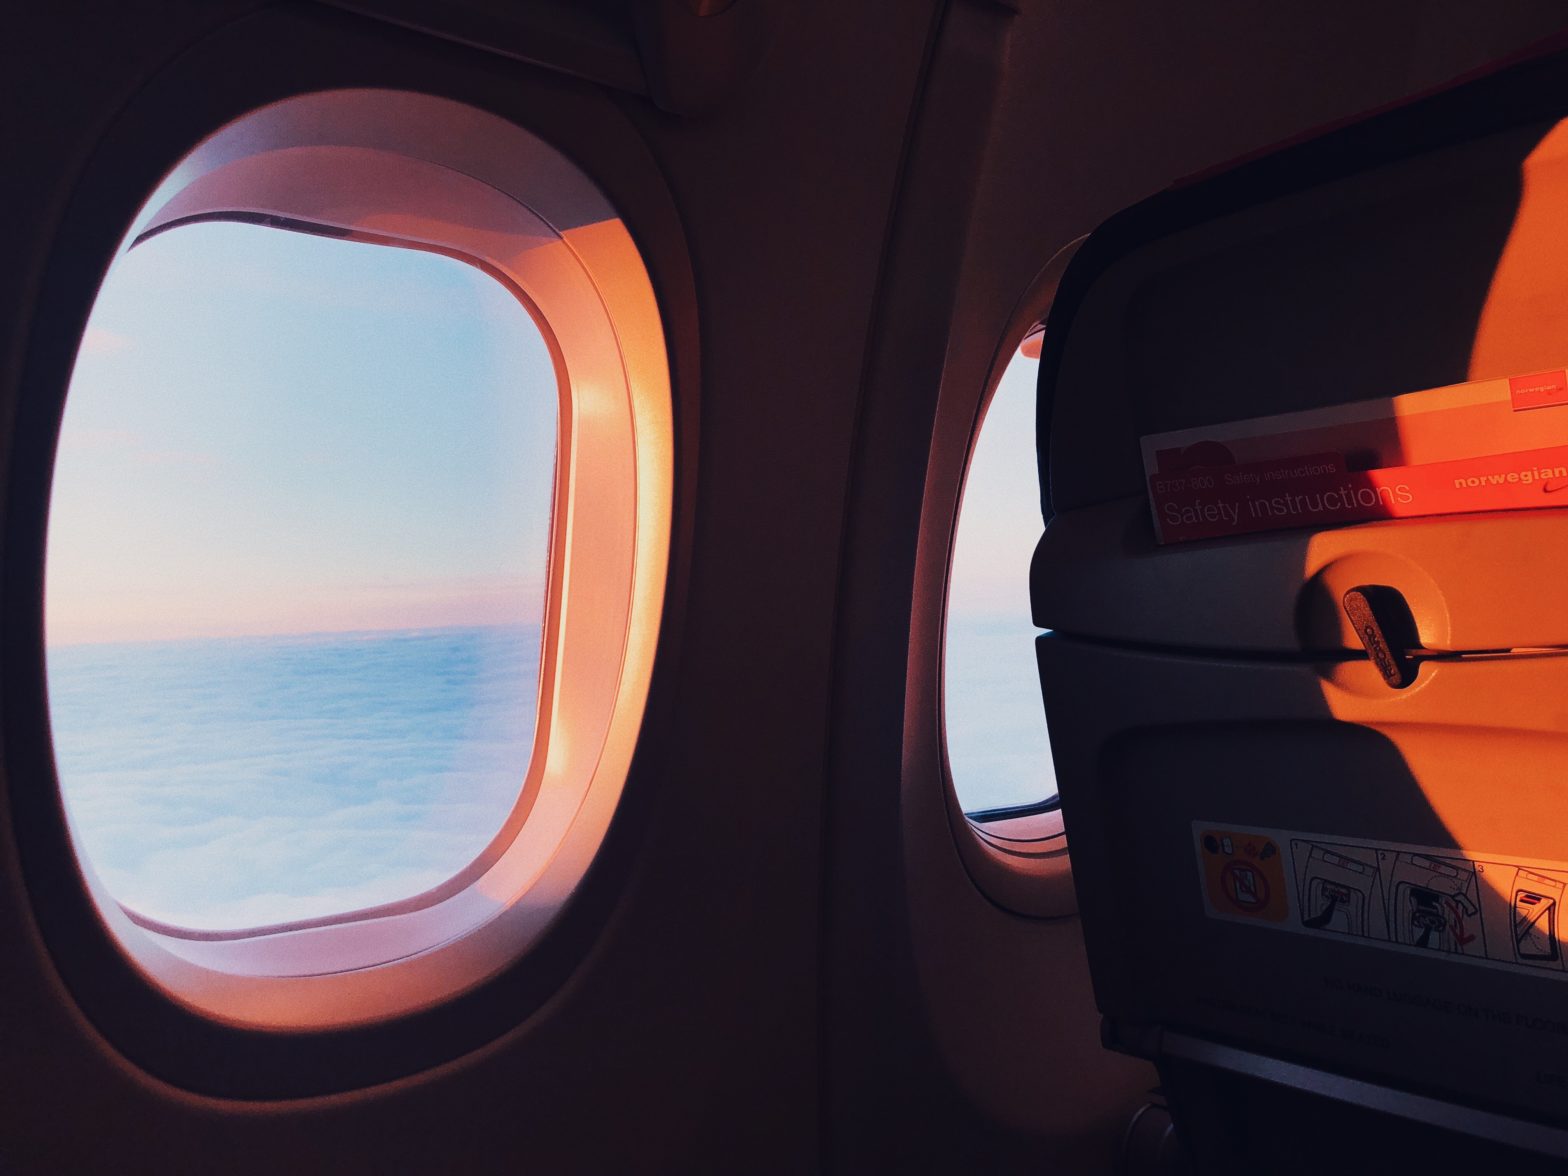 Most of Us Rest Our Heads On Airplane Windows; Here's Why That's Ill-Advised